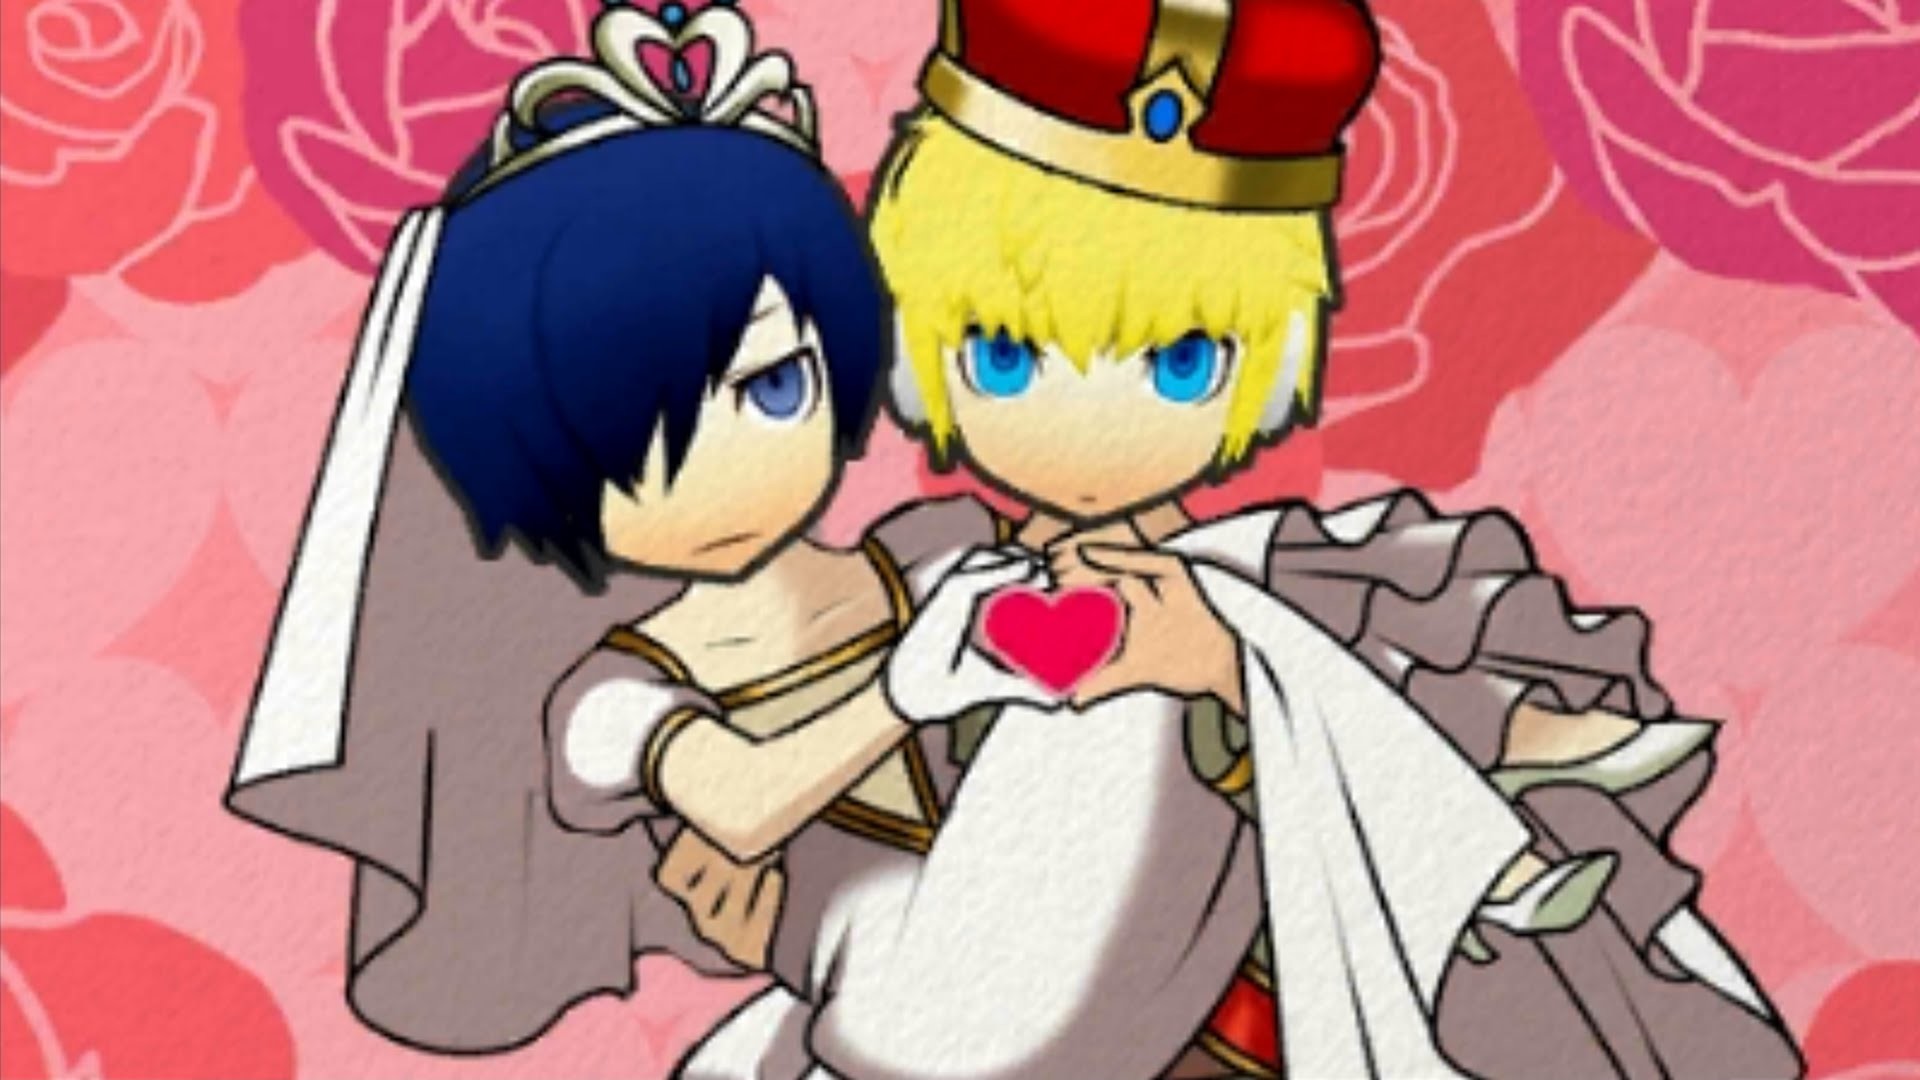 1920x1080 [3DS] Persona Q: Shadow of the Labyrinth [Persona 3] - Wedding: Aigis -  YouTube